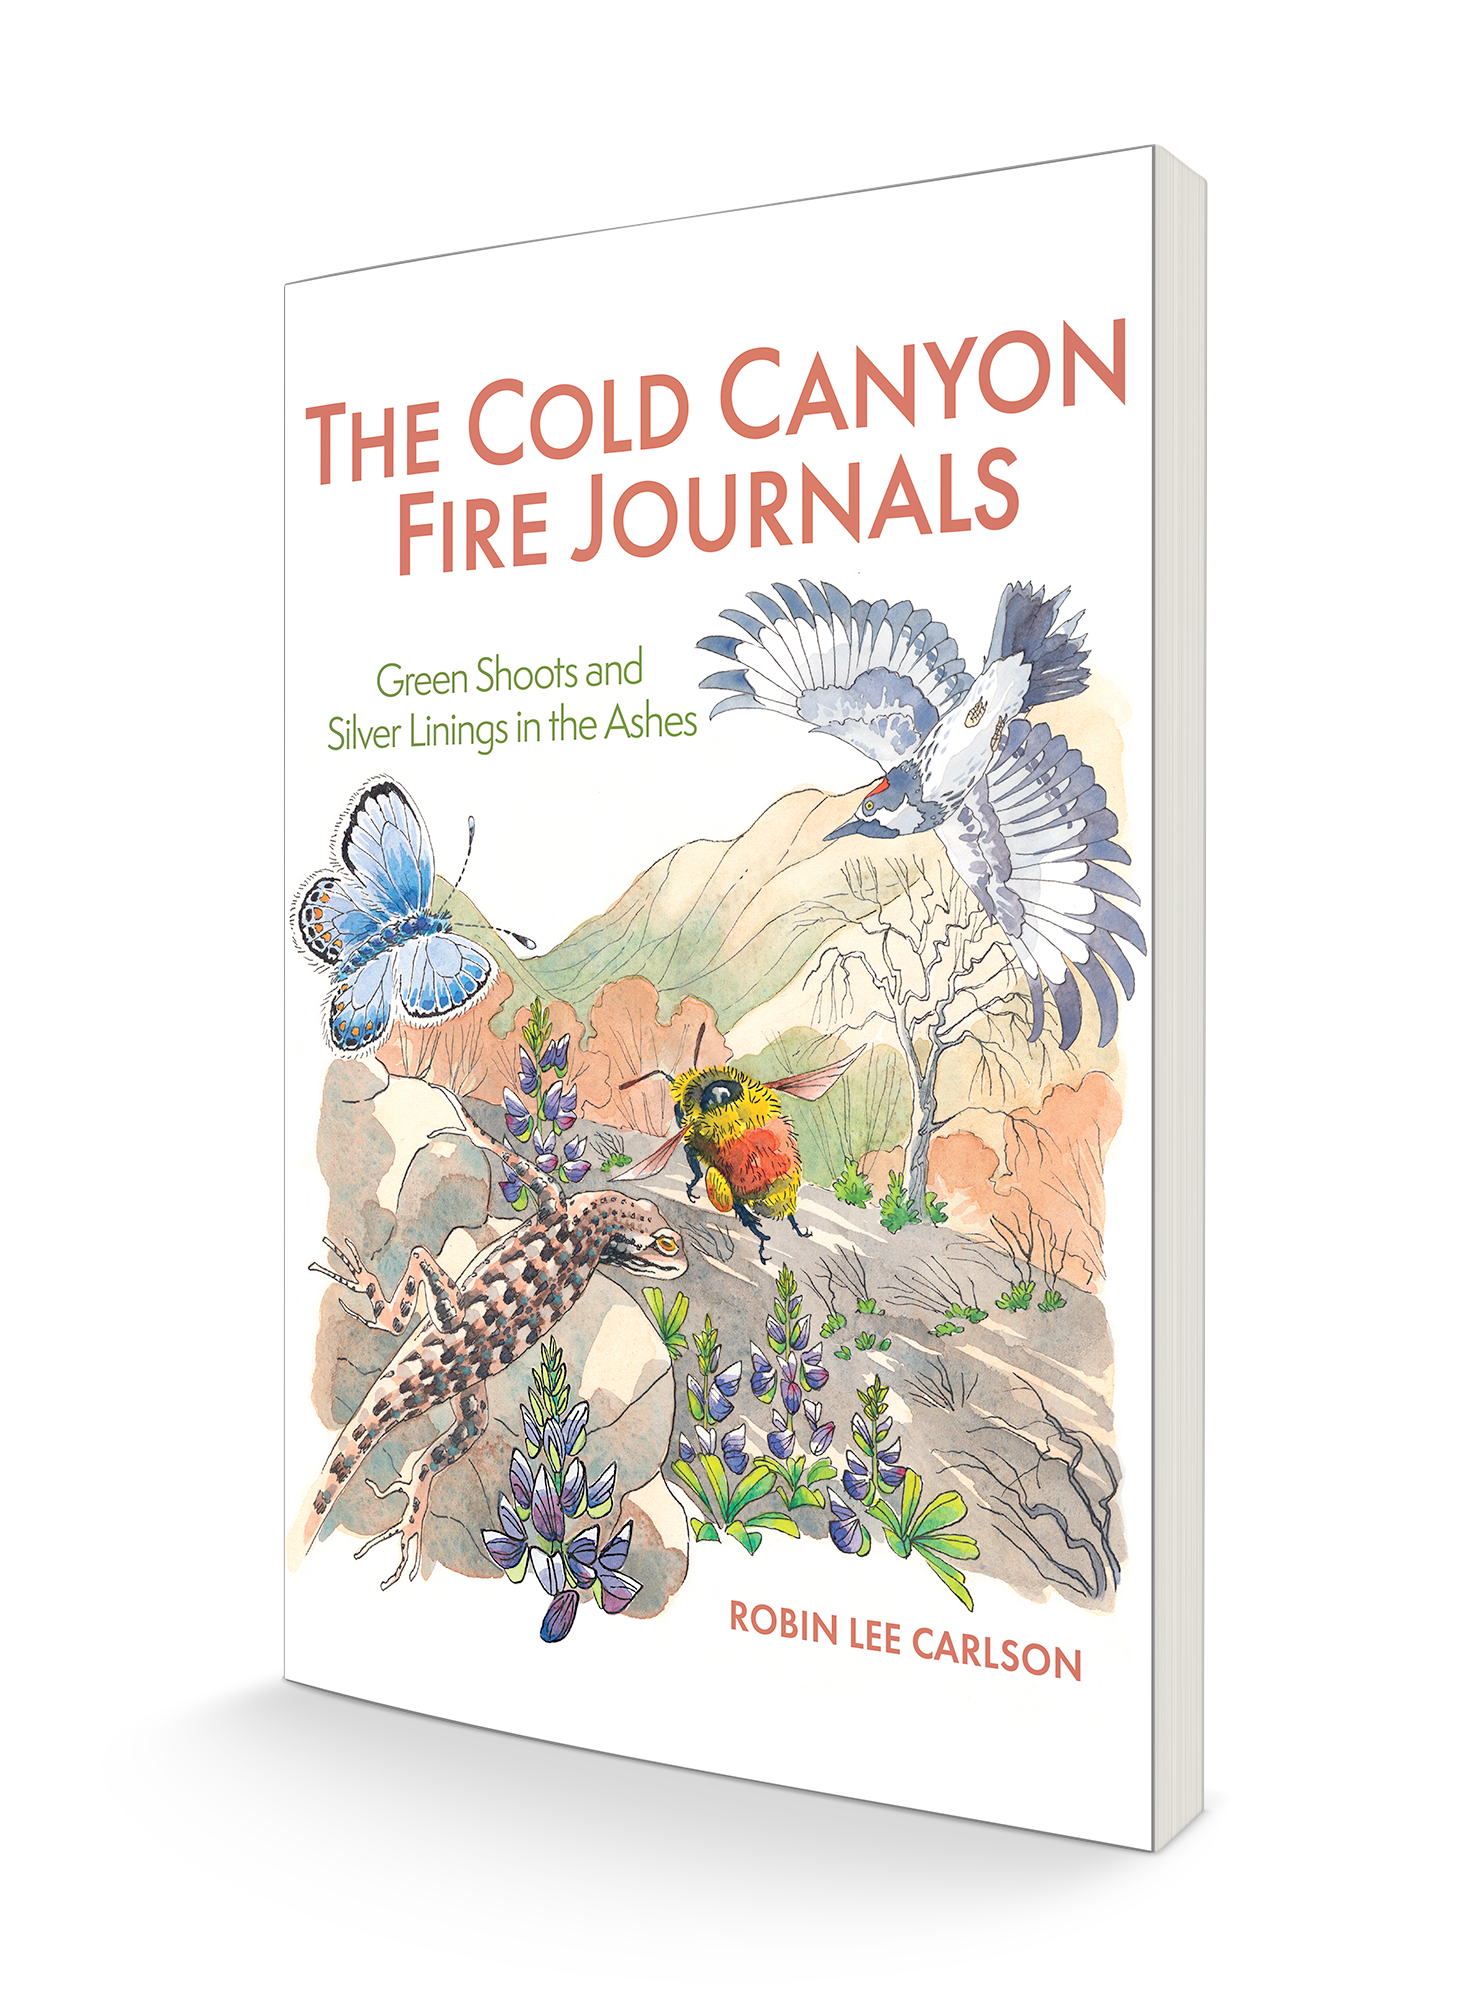 Book Cover: The Cold Canyon Fire Journals by Robin Lee Carlson